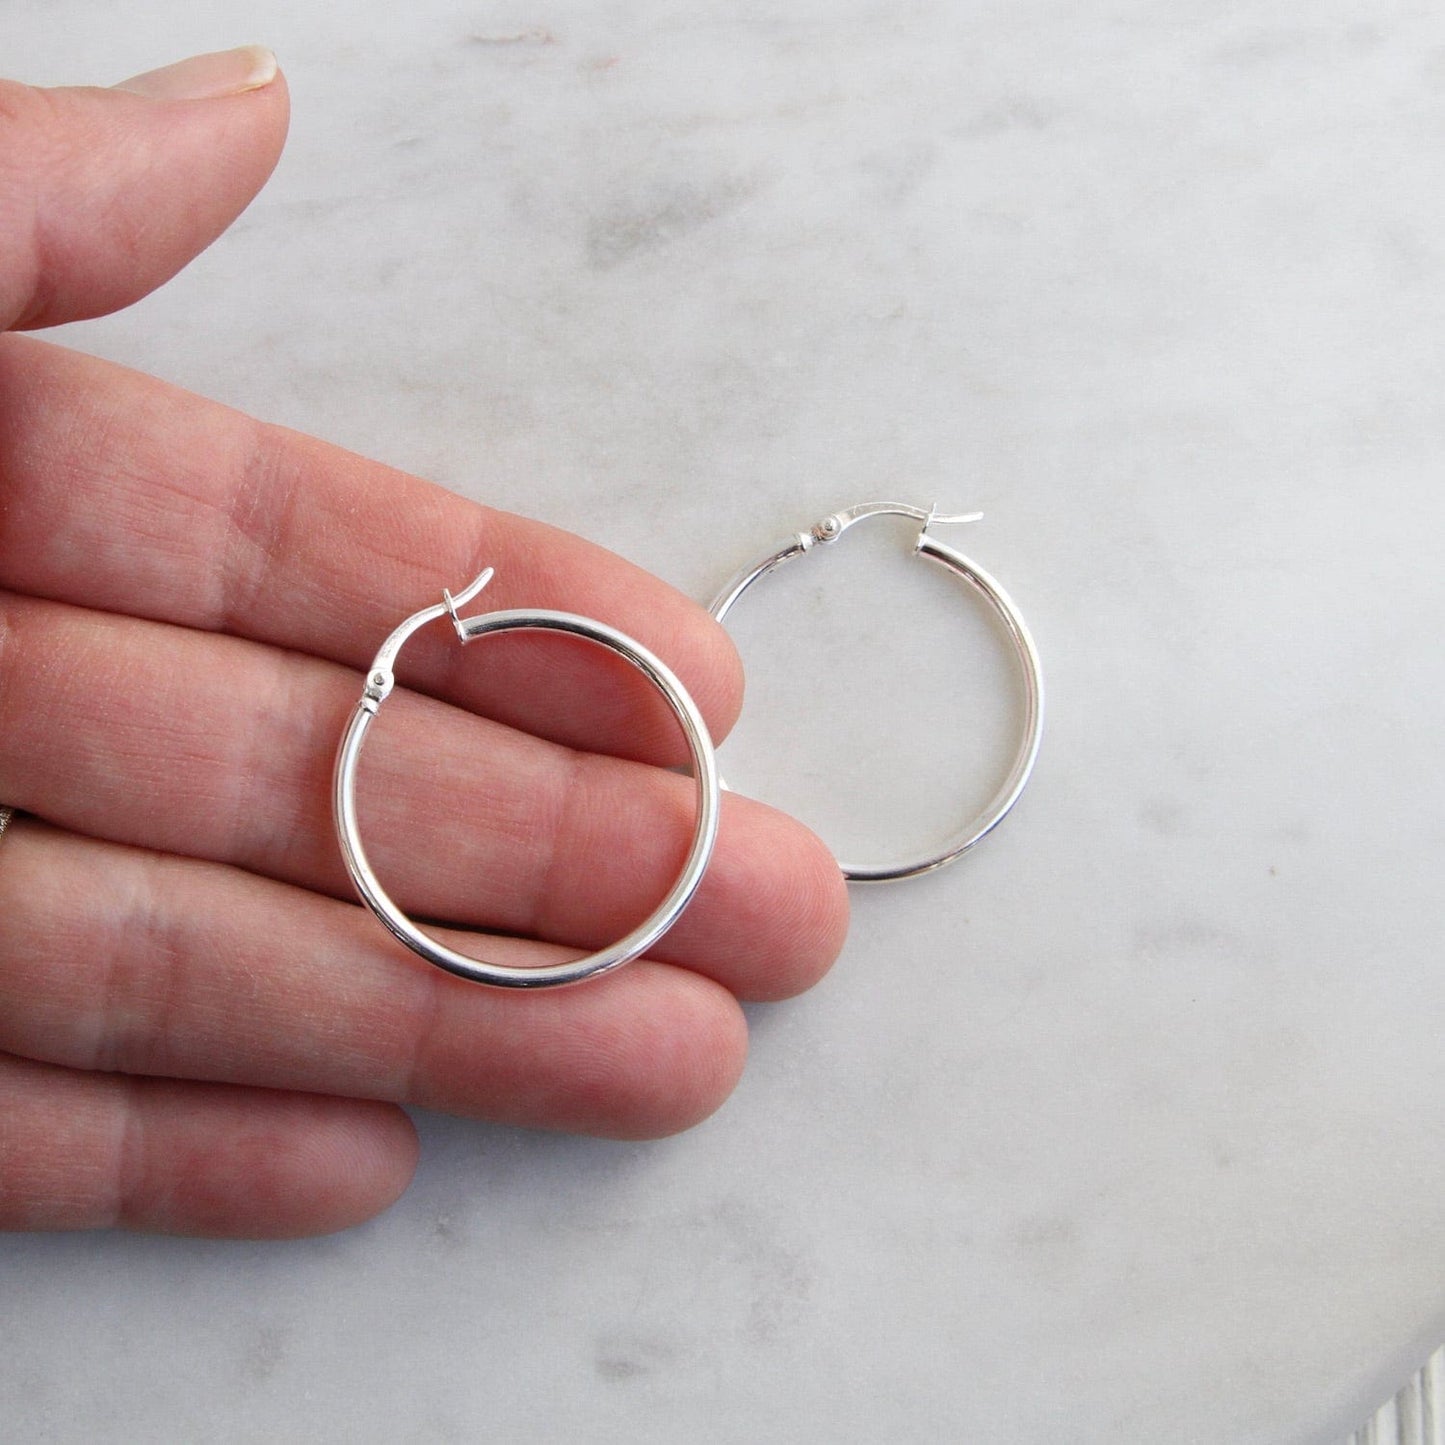 EAR Thick 35mm Sterling Silver Tube Hoop